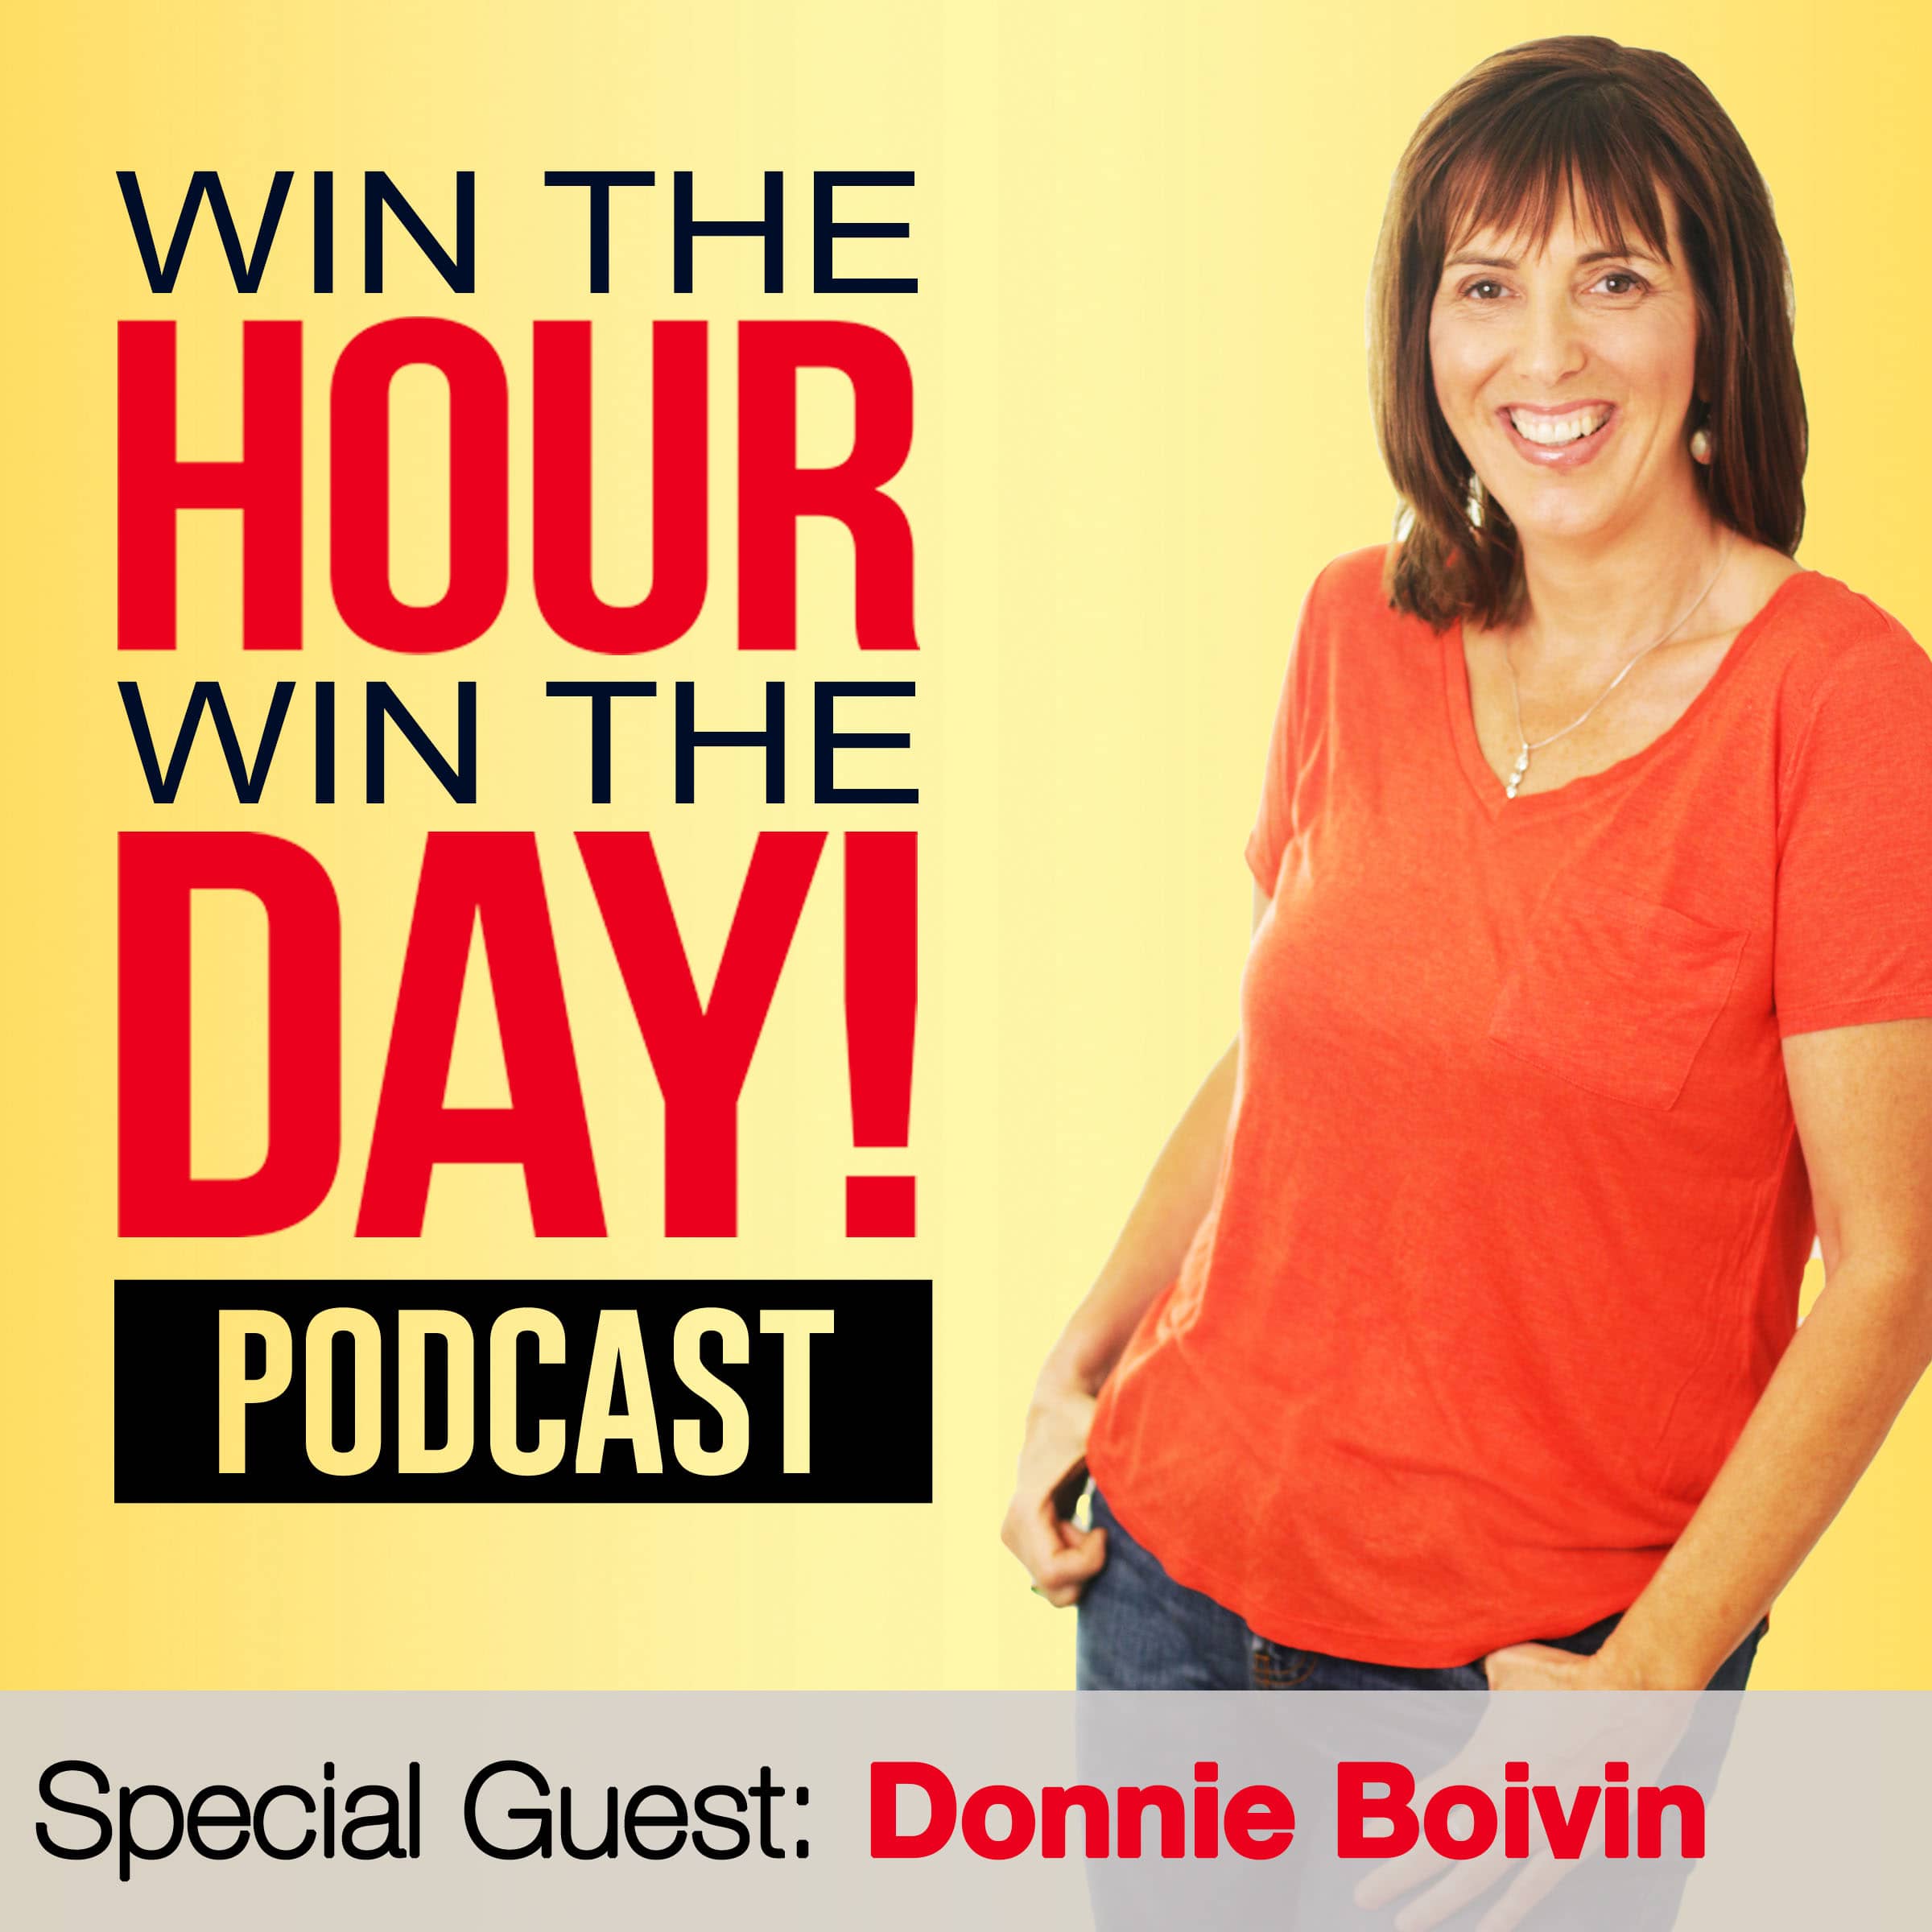 Increase Your Sales And It’s Not What You Think! With Donnie Boivin